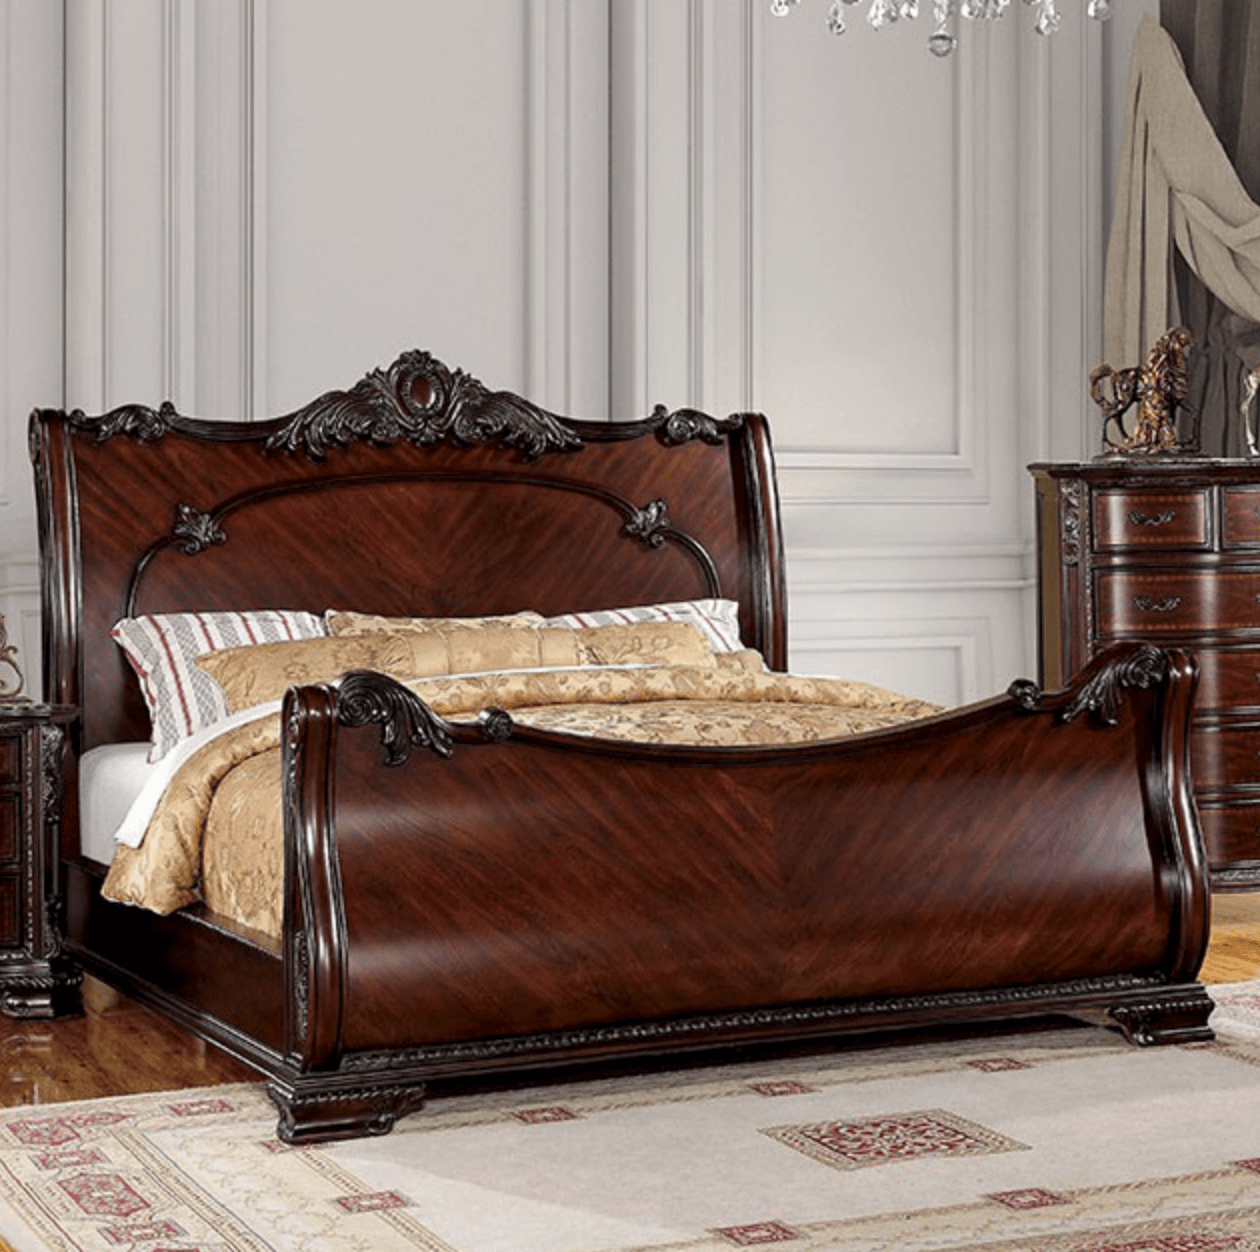 Bellefonte Collection Brown Cherry Finish King Sleigh Bed